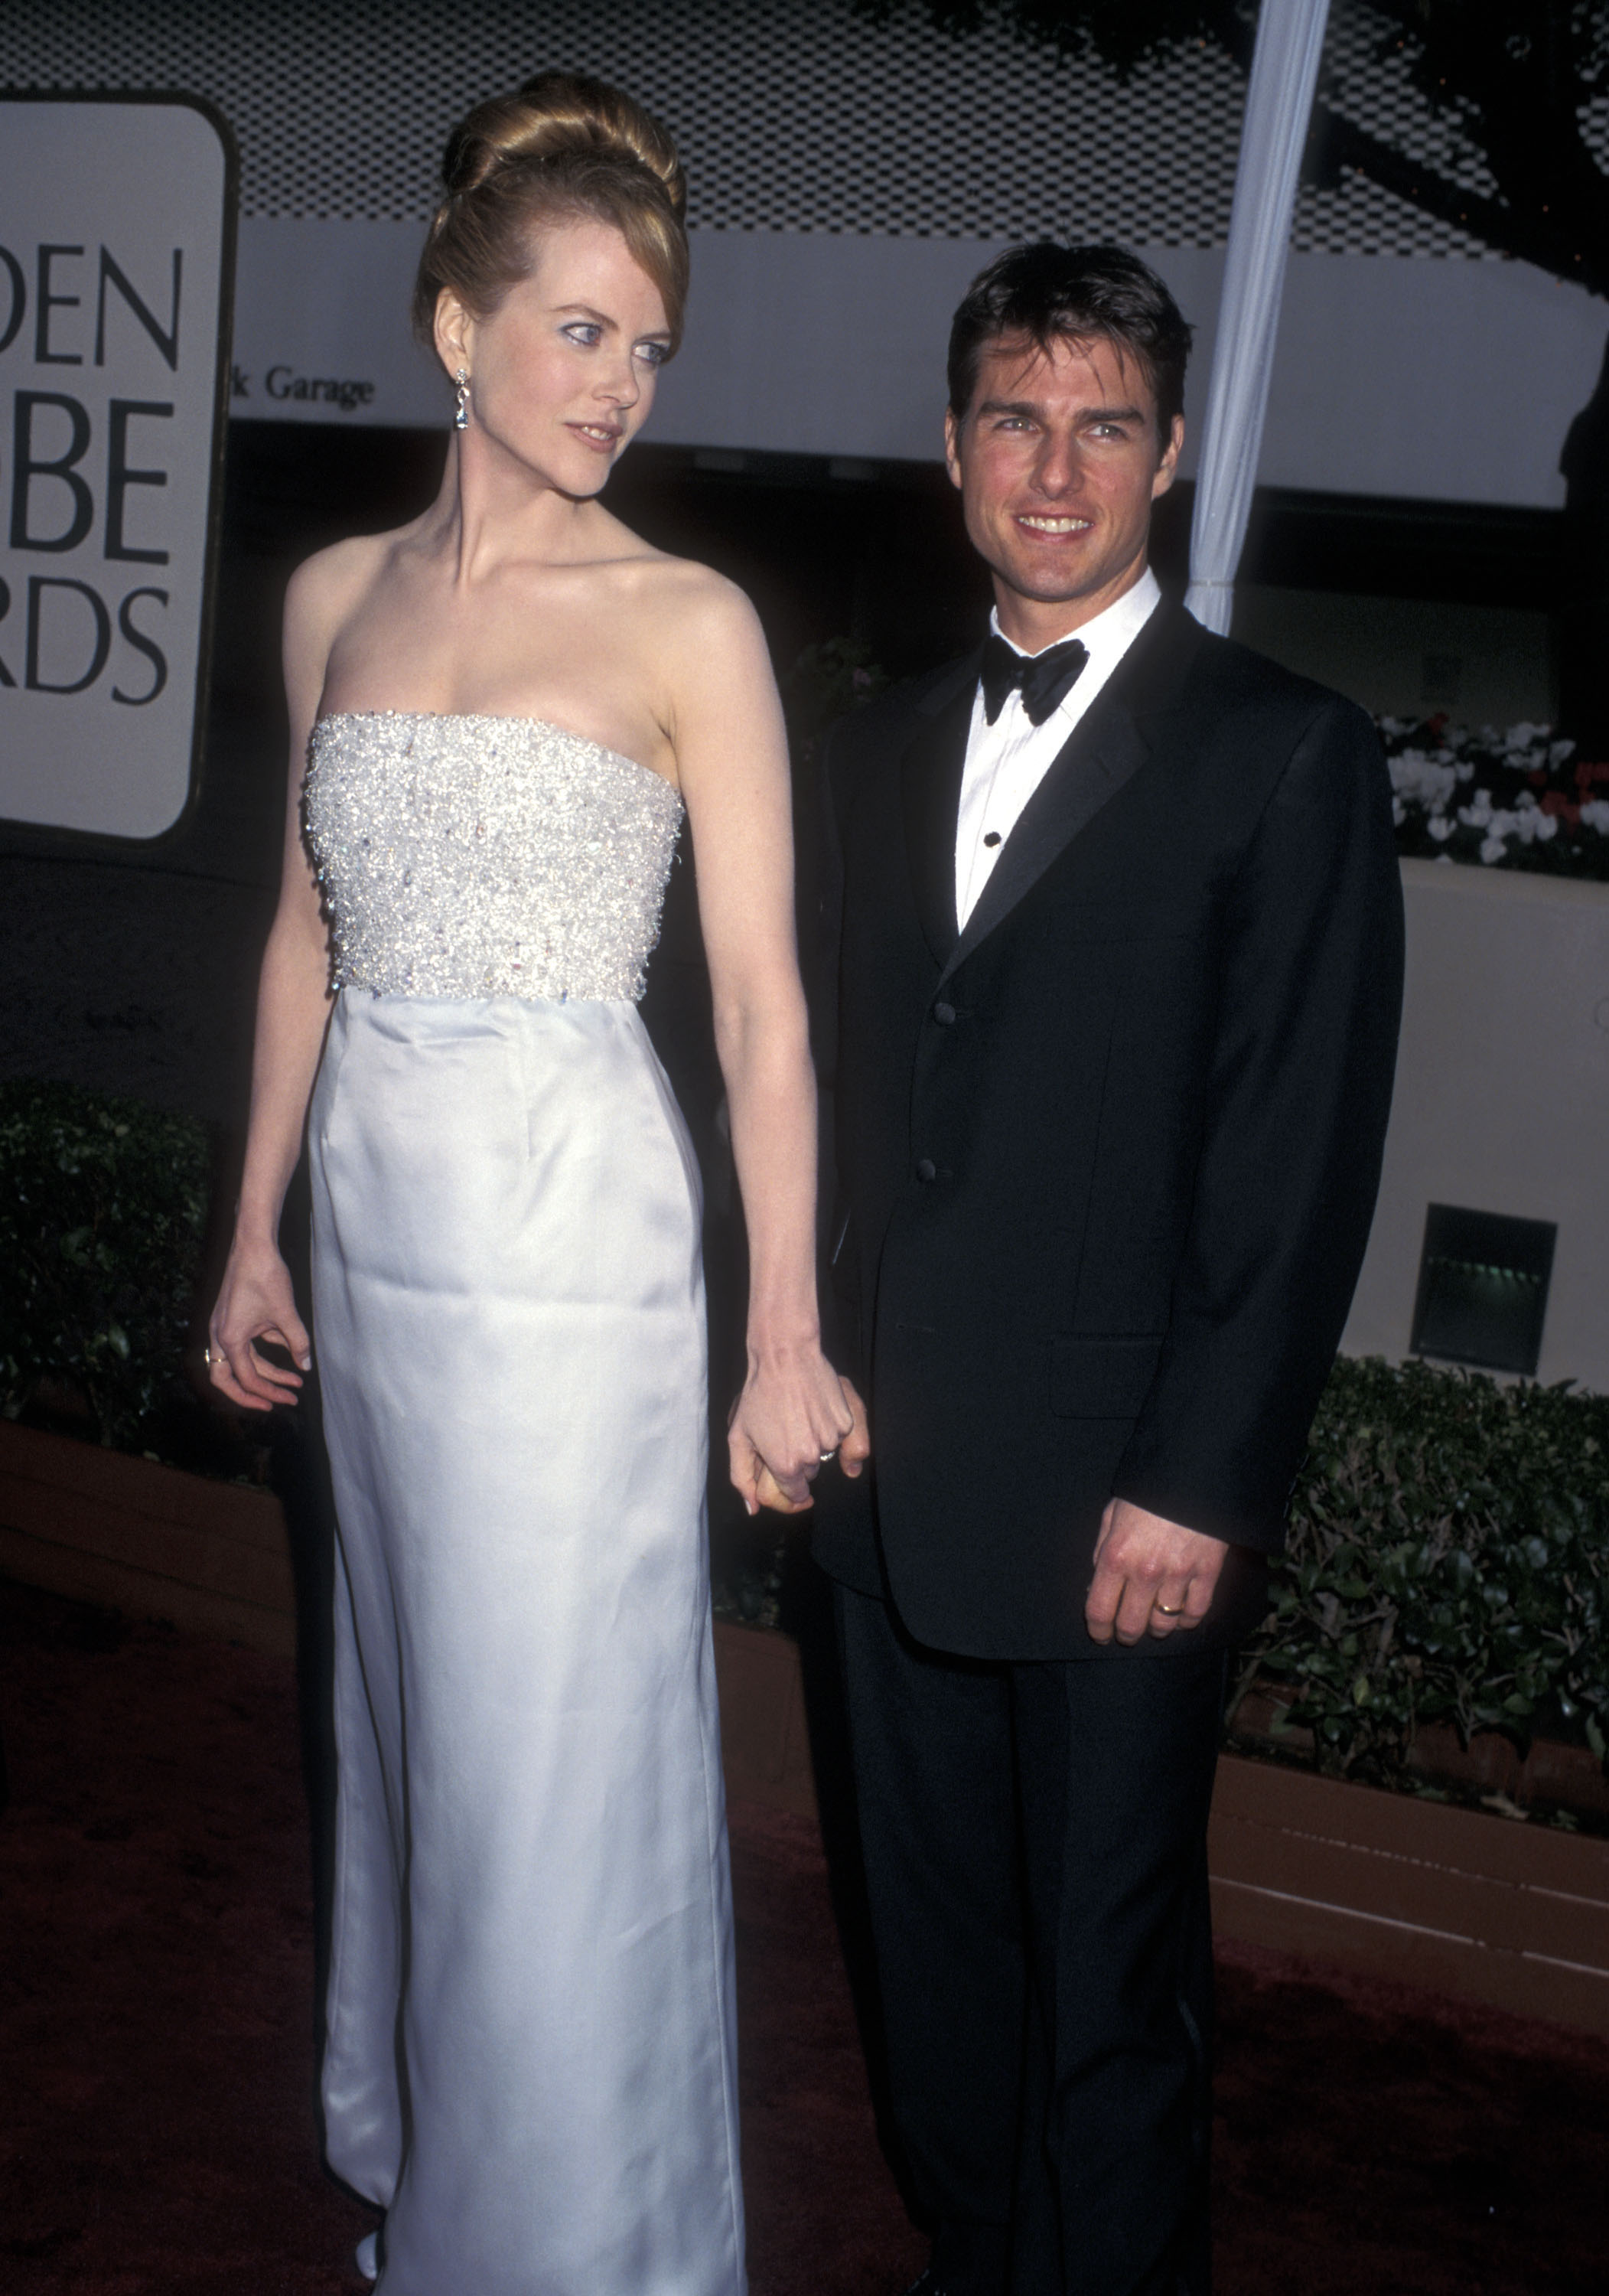 Nicole Kidman and Tom Cruise at the 53rd Annual Golden Globe Awards on January 21, 1996, in Beverly Hills, California | Source: Getty Images